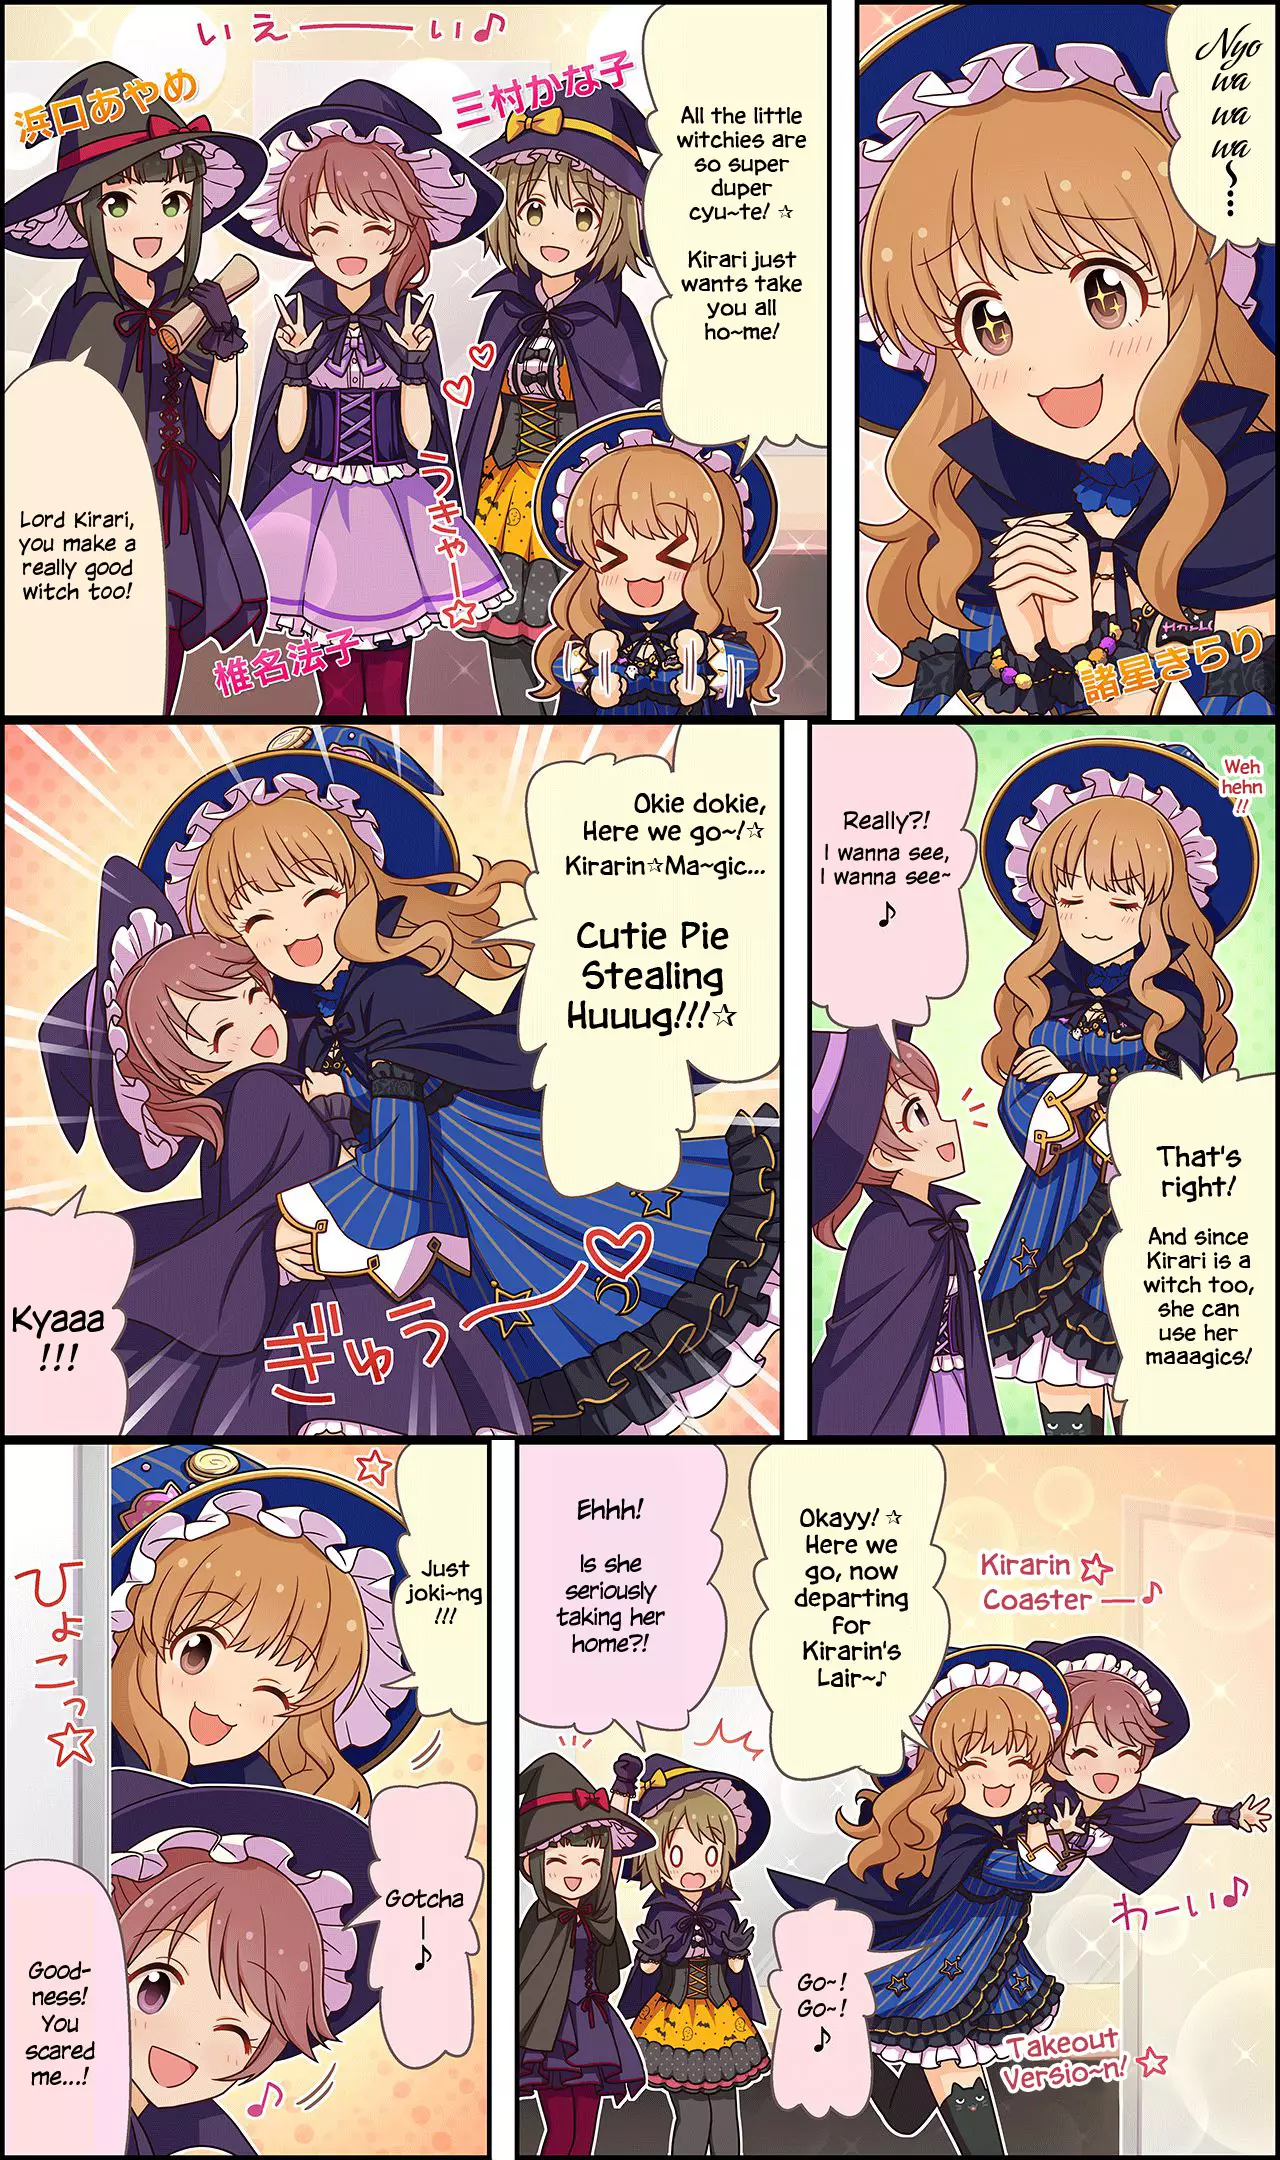 The [email protected] Cinderella Girls Gekijou Wide☆ - 49 page 1-c87c83db